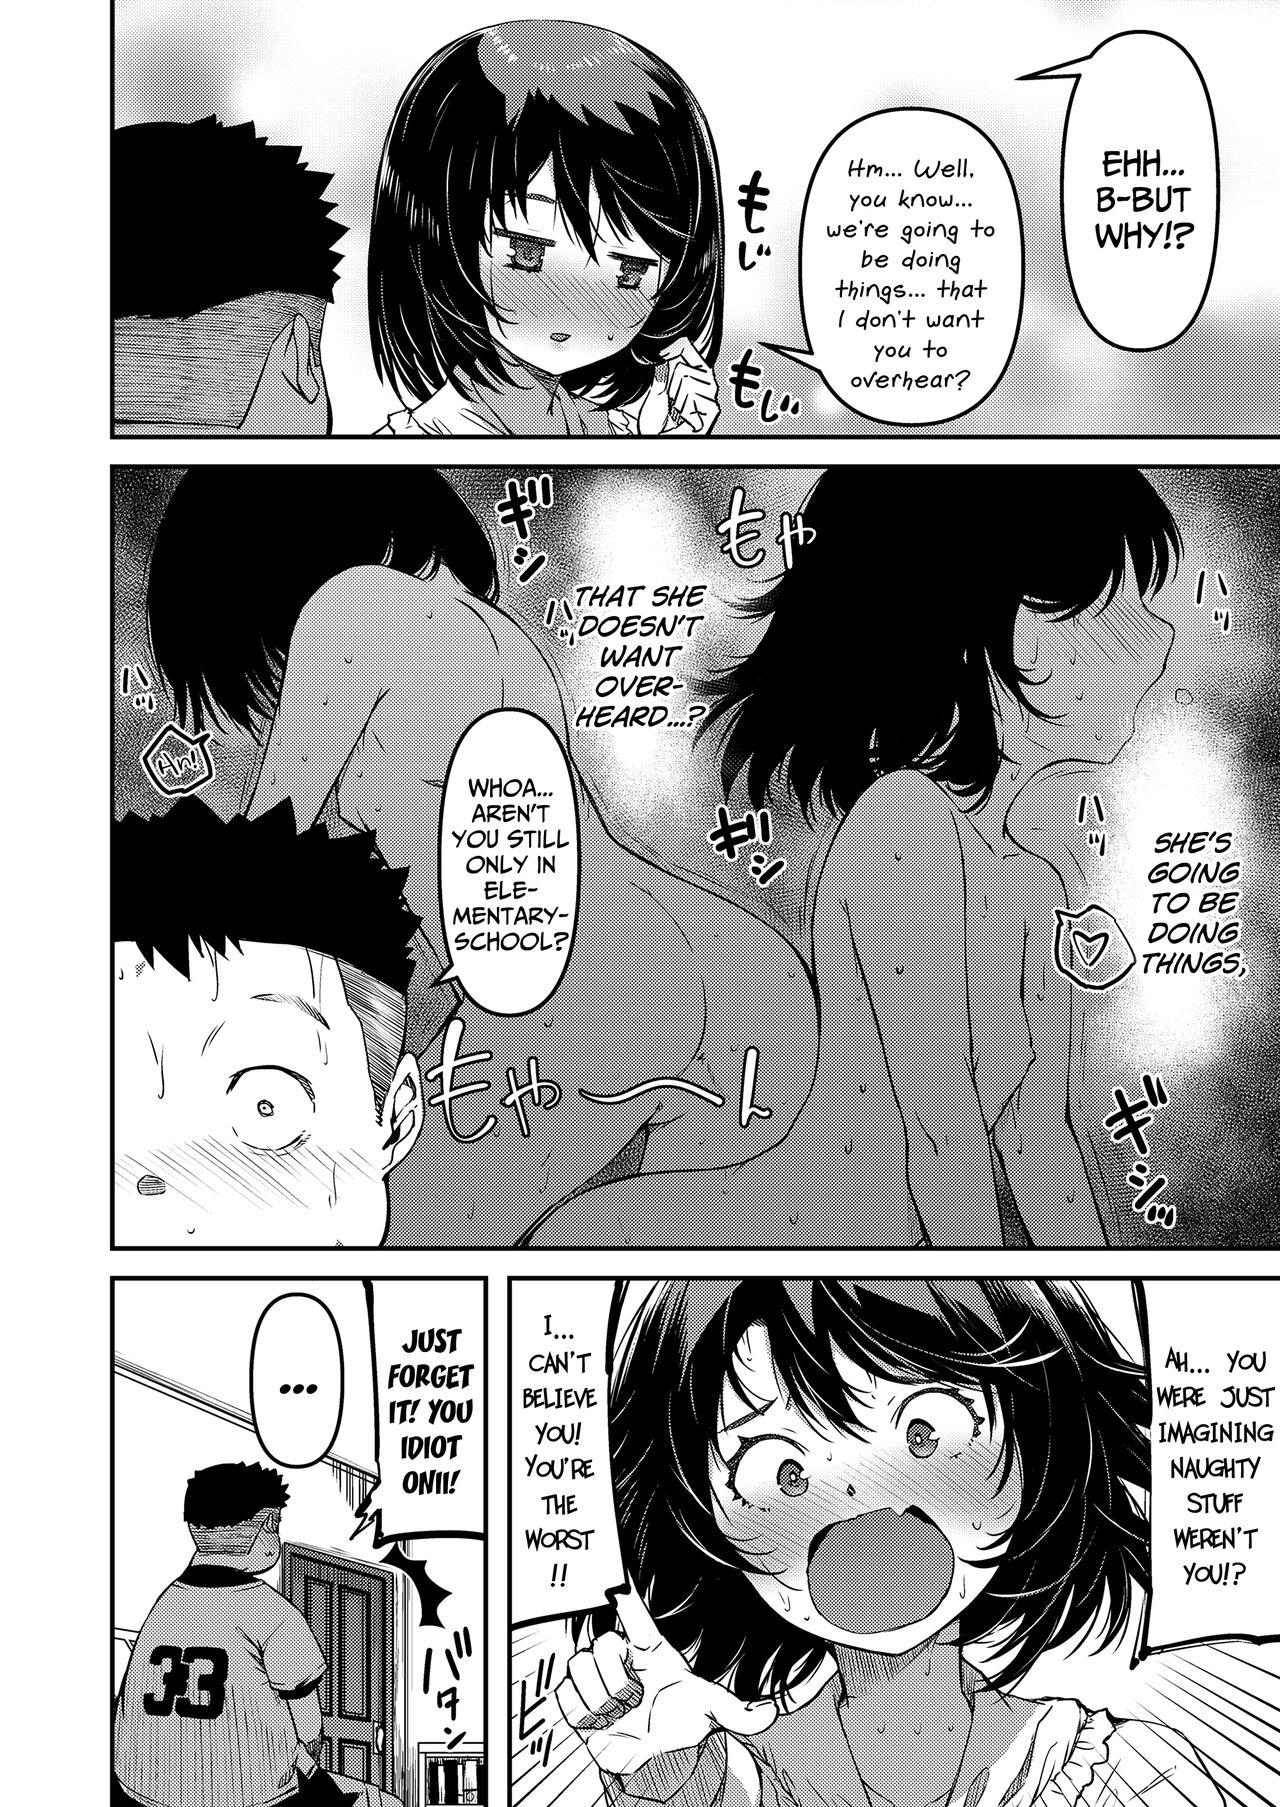 Muscle Omasena Imouto | My Precocious Little-Sister Gemendo - Page 4